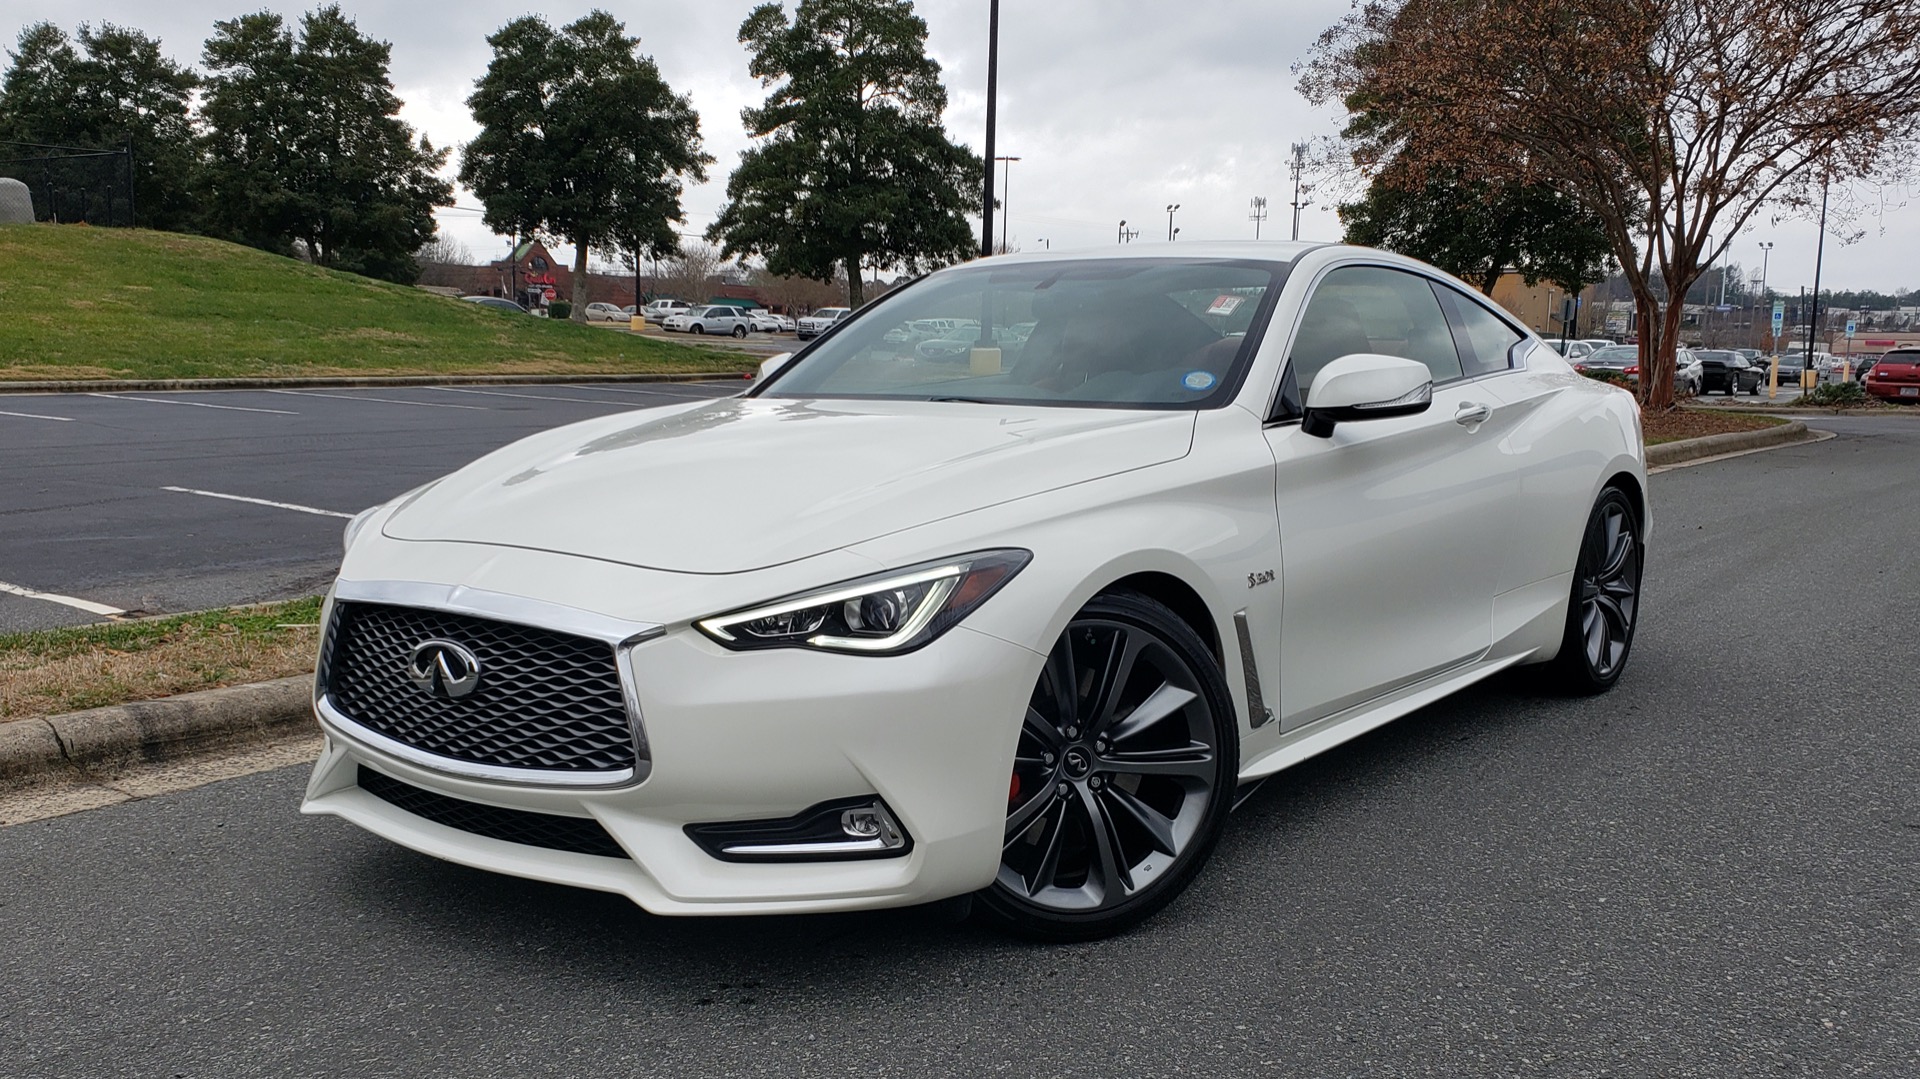 Used 2018 Infiniti Q60 RED SPORT 400 / SENSORY PKG / SUNROOF / NAV / REARVIEW for sale Sold at Formula Imports in Charlotte NC 28227 1